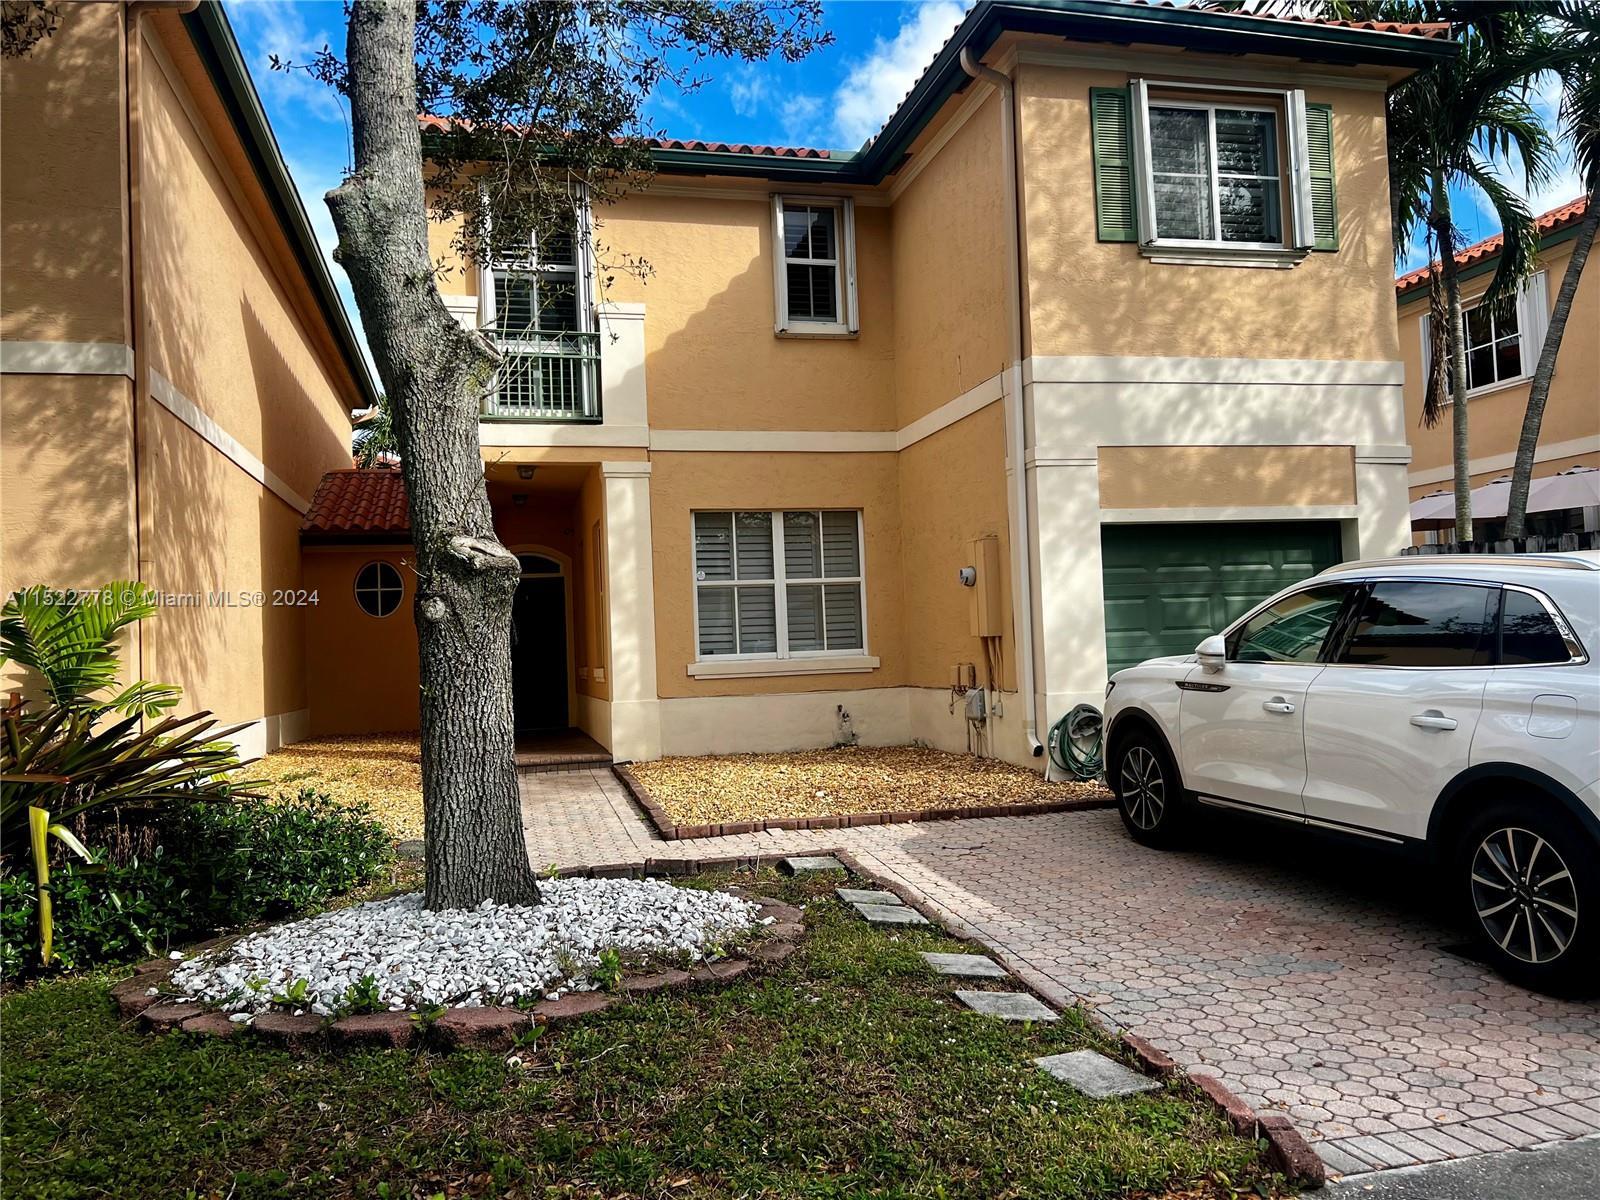 Photo of 14243 NW 83rd Pl in Miami Lakes, FL